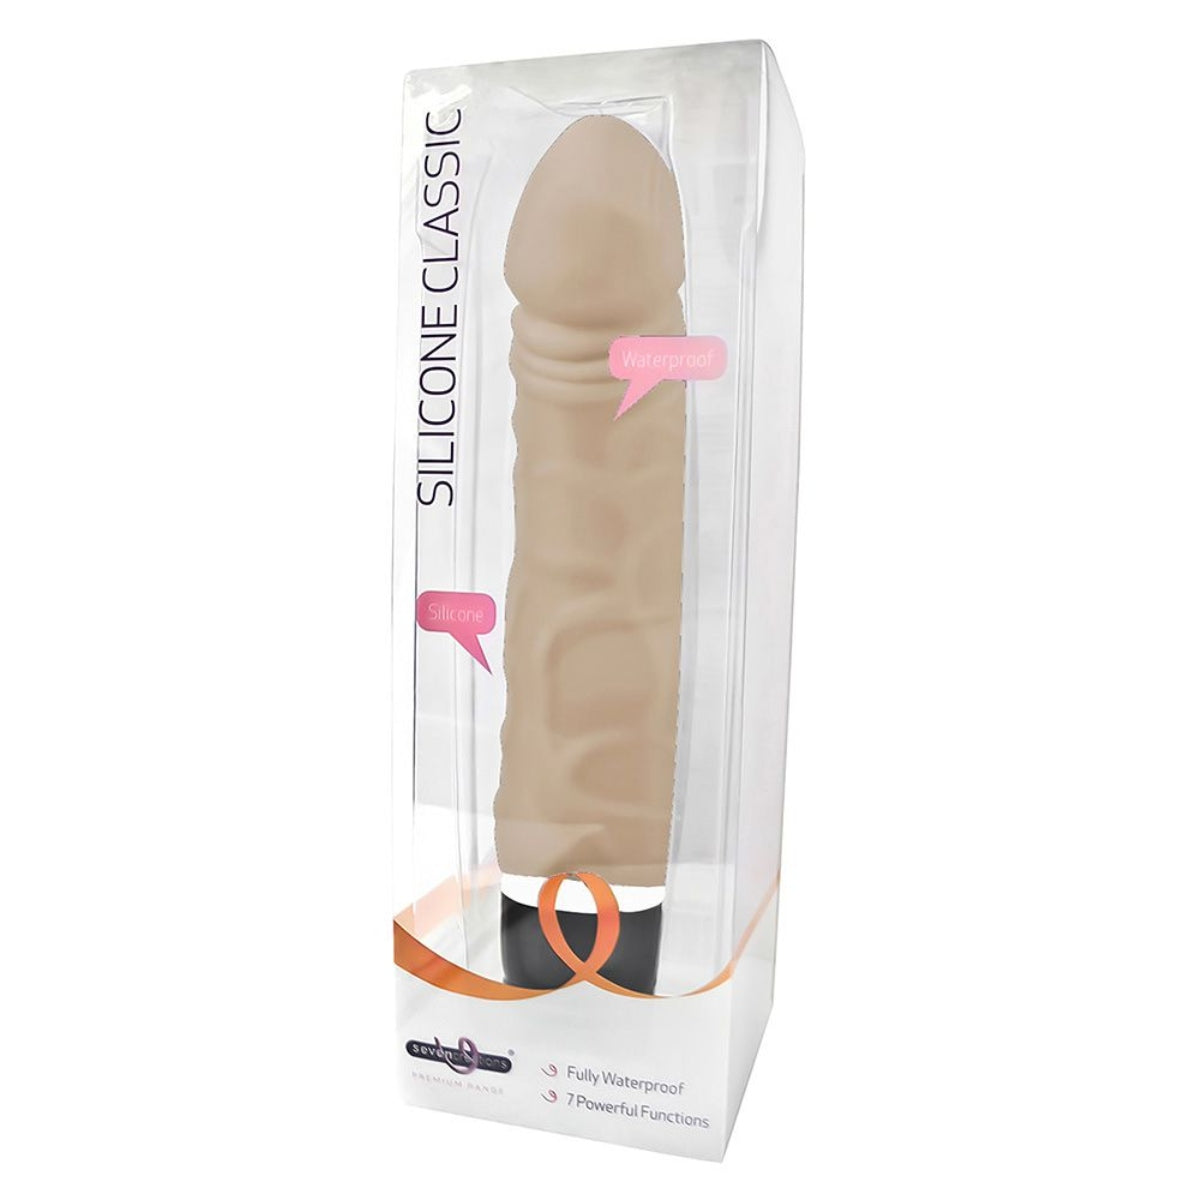 Seven Creations Classic Silicone Vibrator Light Pink 6.5 Inch